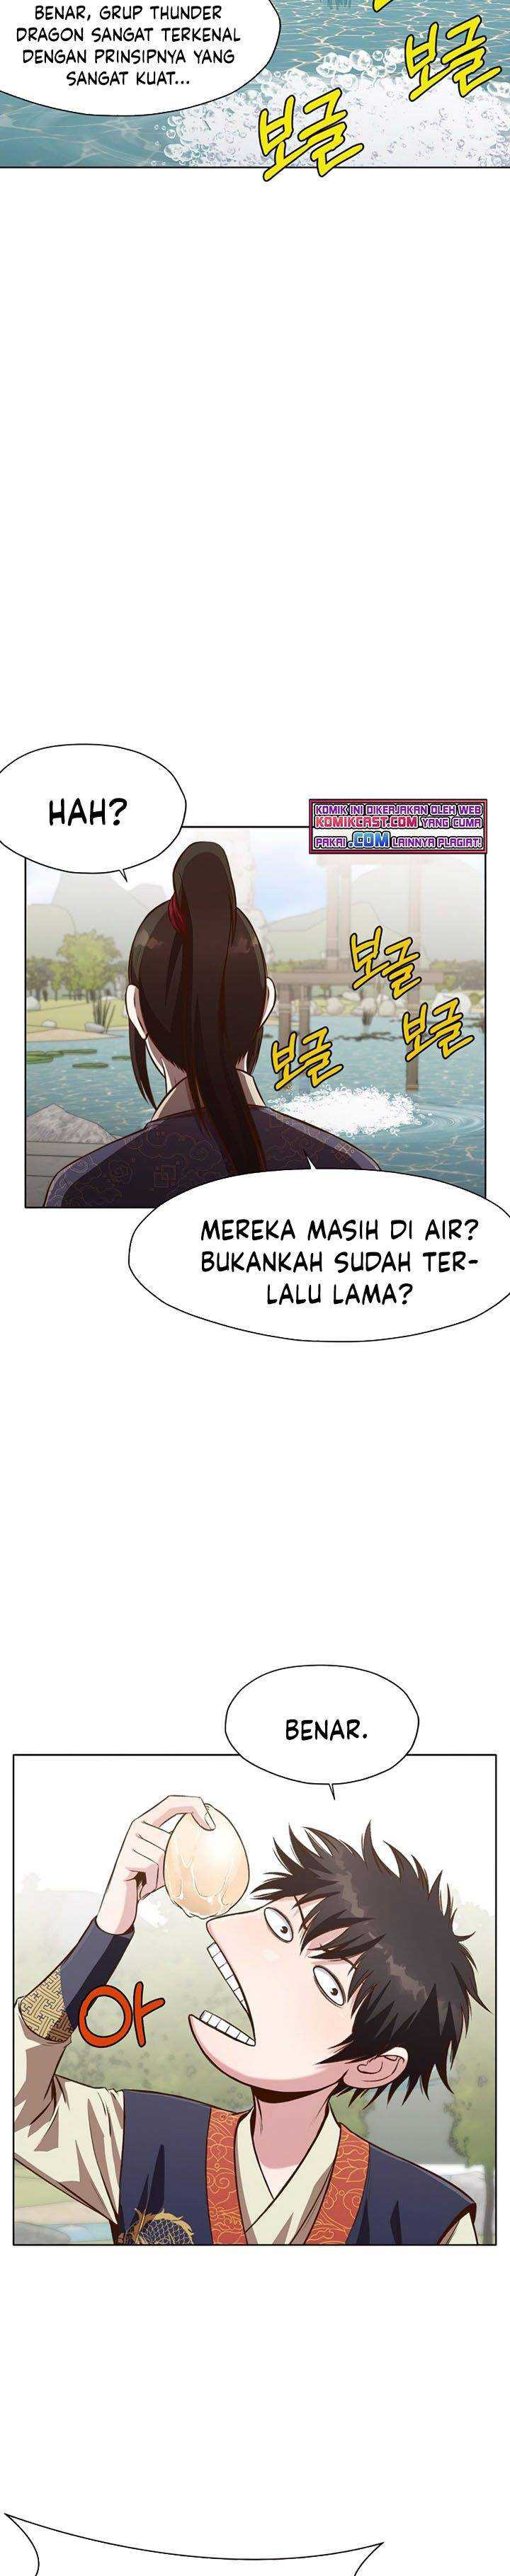 Heavenly Martial God Chapter 18